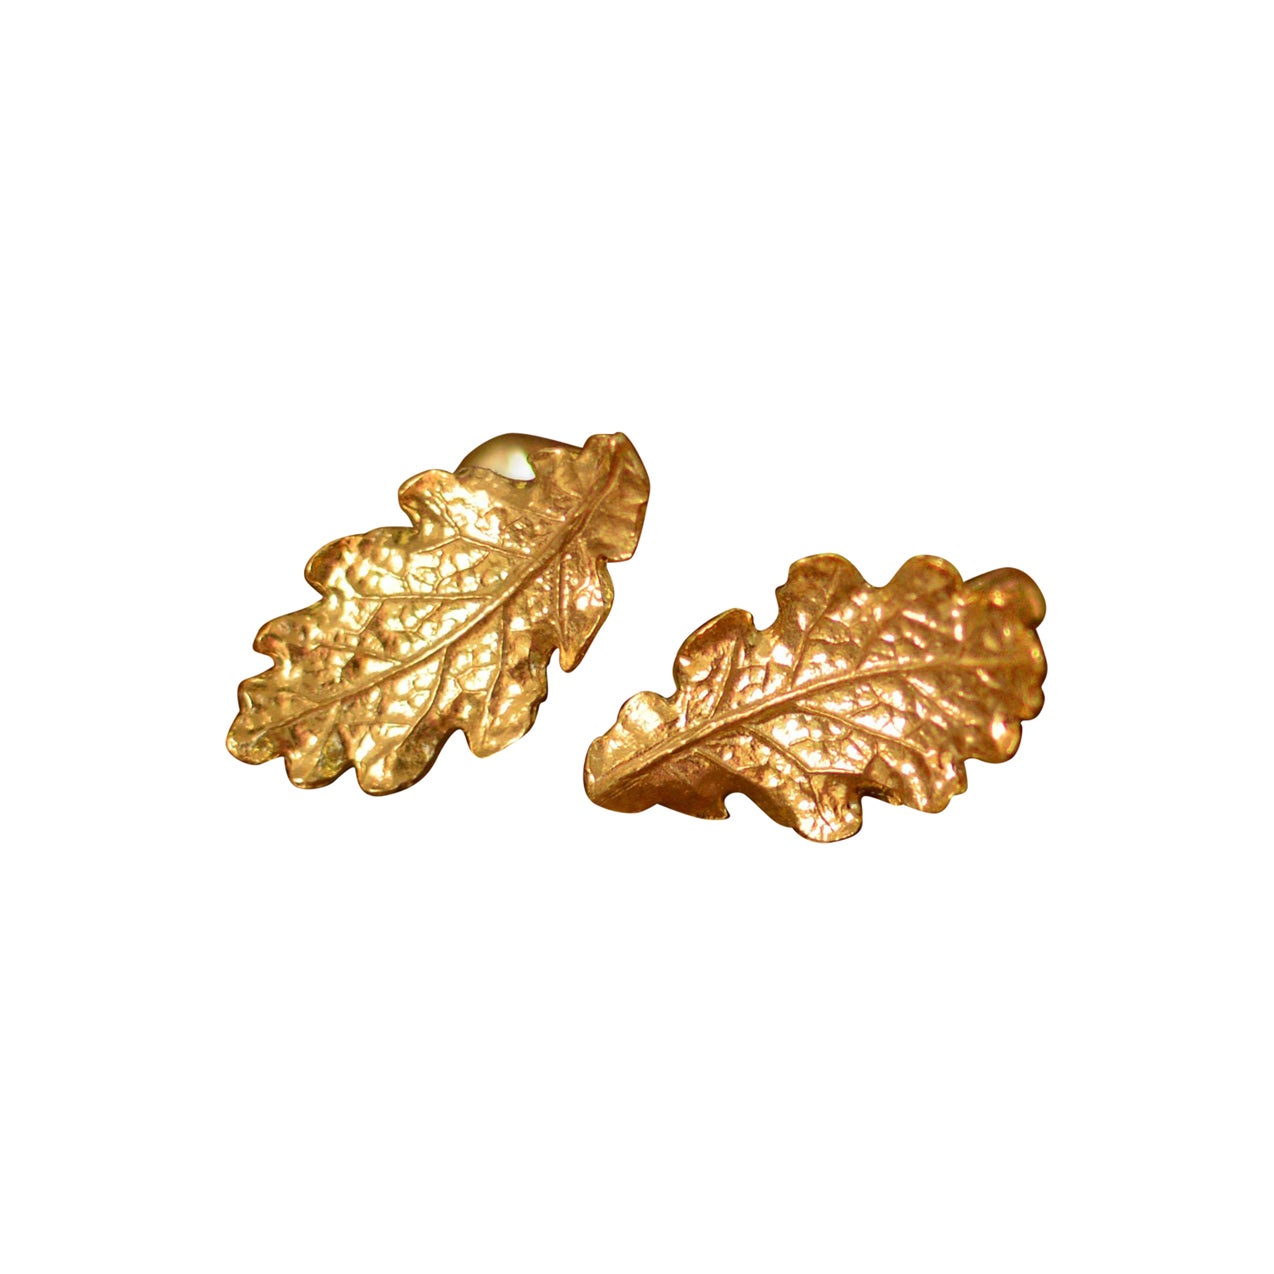 These curling oak leaves form a half-hoop shaped stud earrings are cast in solid 18 Carat gold and finished by hand, and created from Lucy's original hand-sculpted design. 

These oak leaf earrings are made in London, United Kingdom using recycled